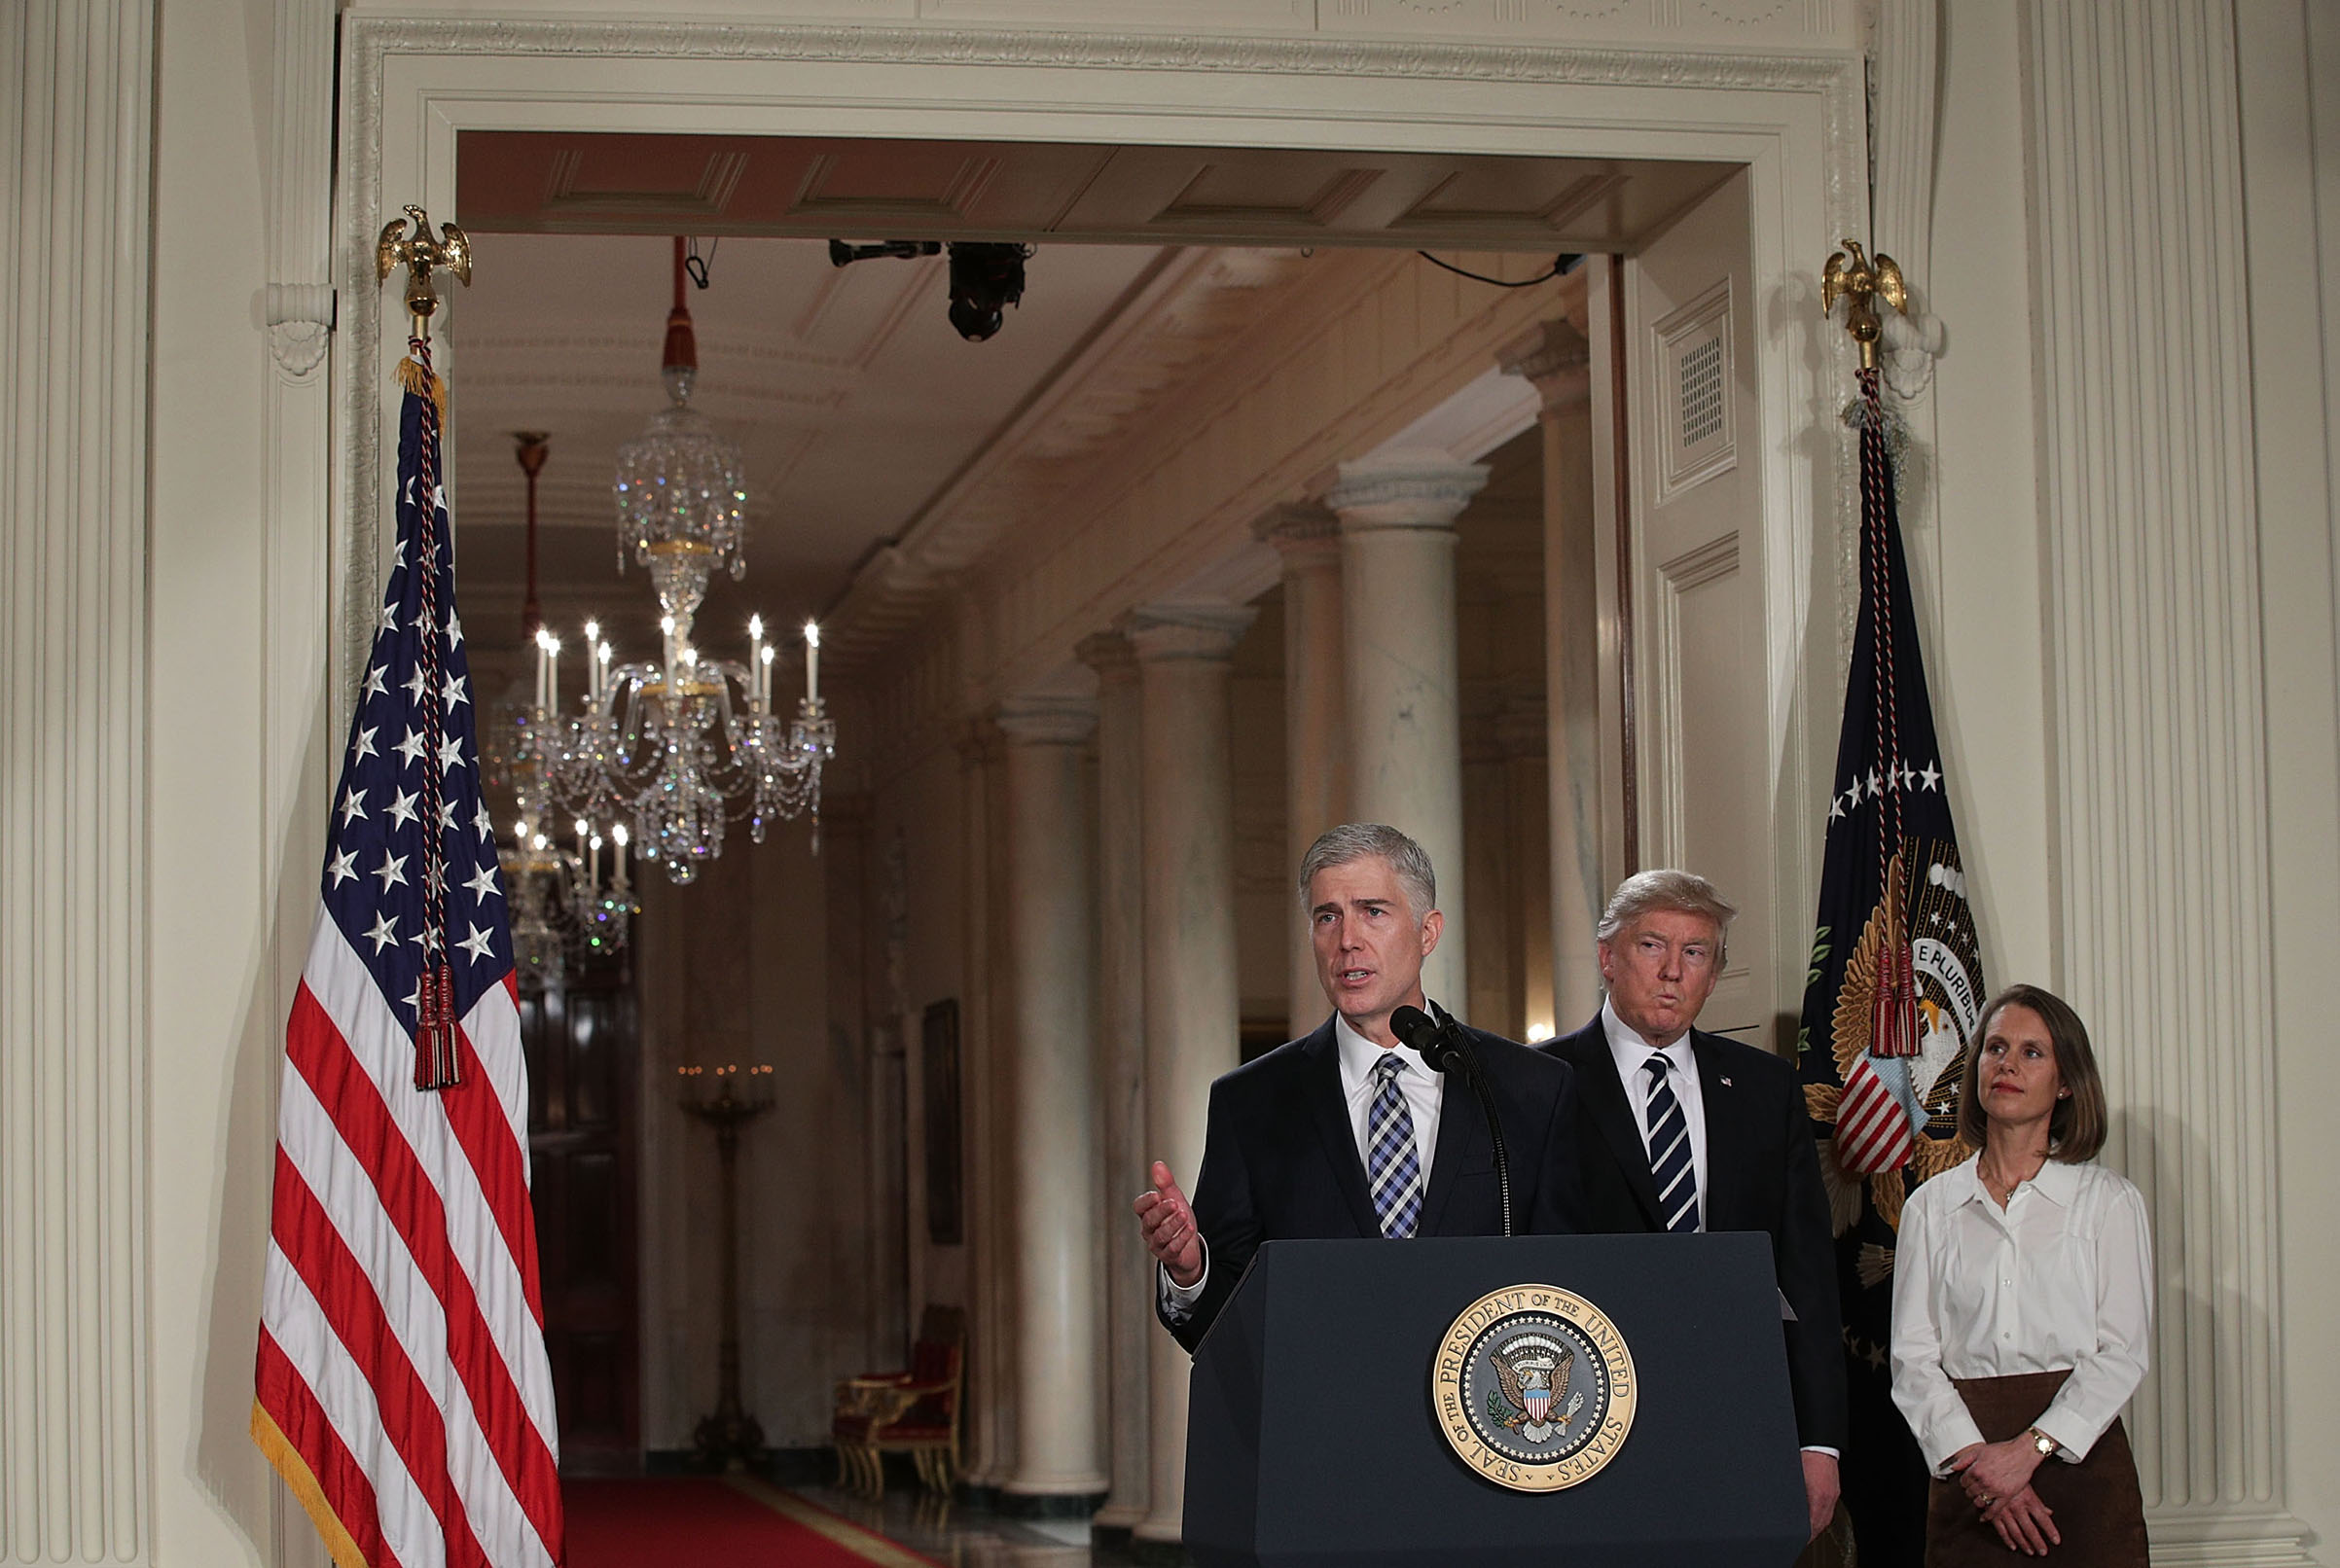 Judge Neil Gorsuch speaks to the crowd on Jan. 31, 2017 after President Donald Trump nominated him to the Supreme Court. (Alex Wong—Getty Images)